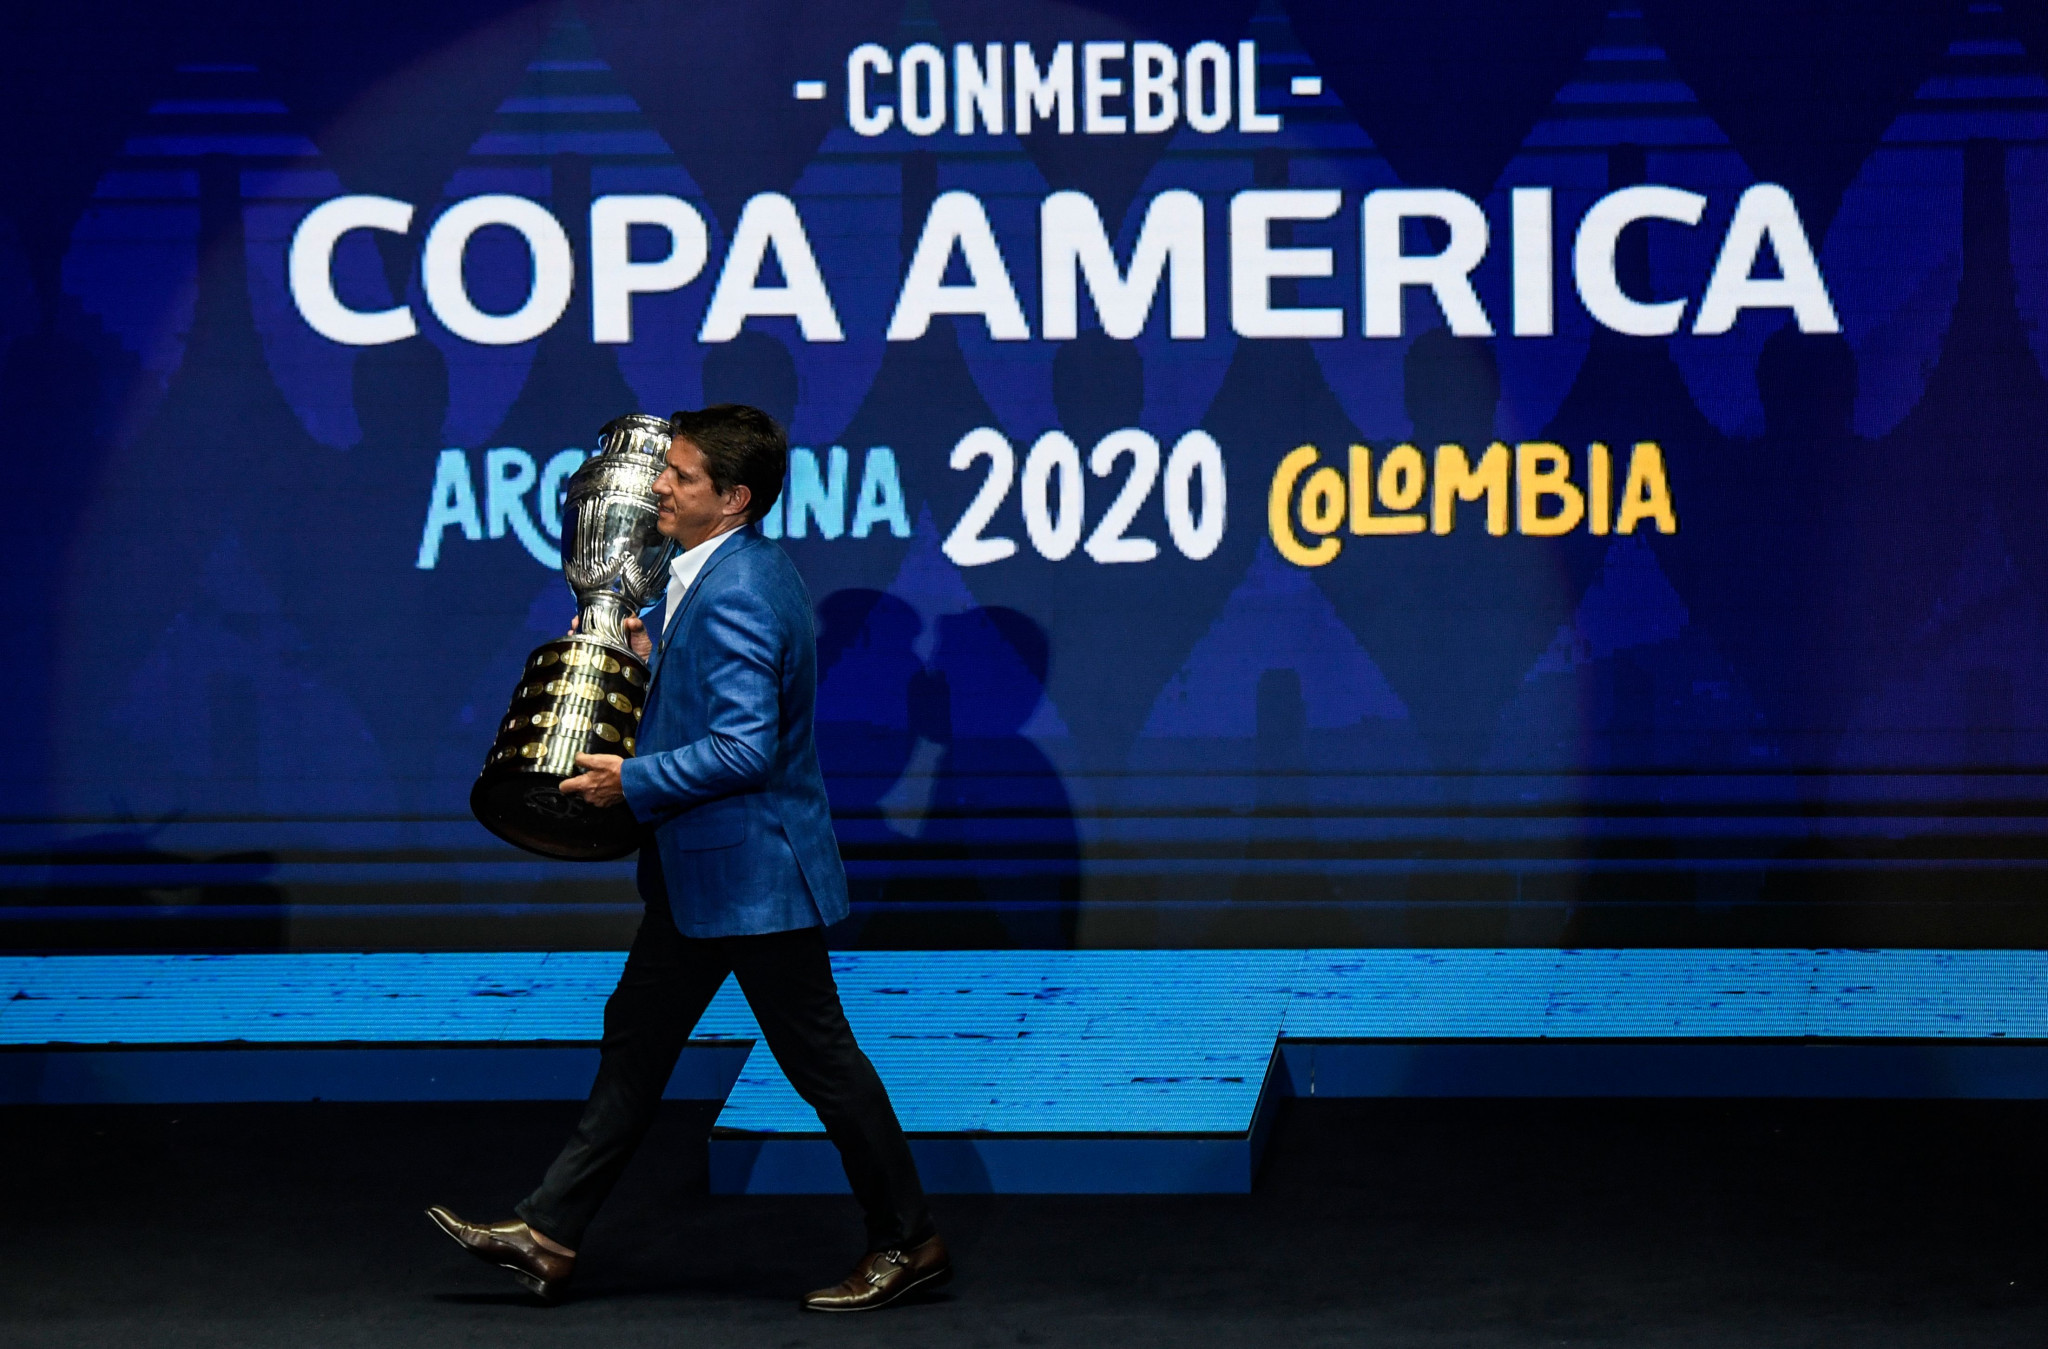 Organisers want 30 per cent capacity crowds at 2021 Copa América